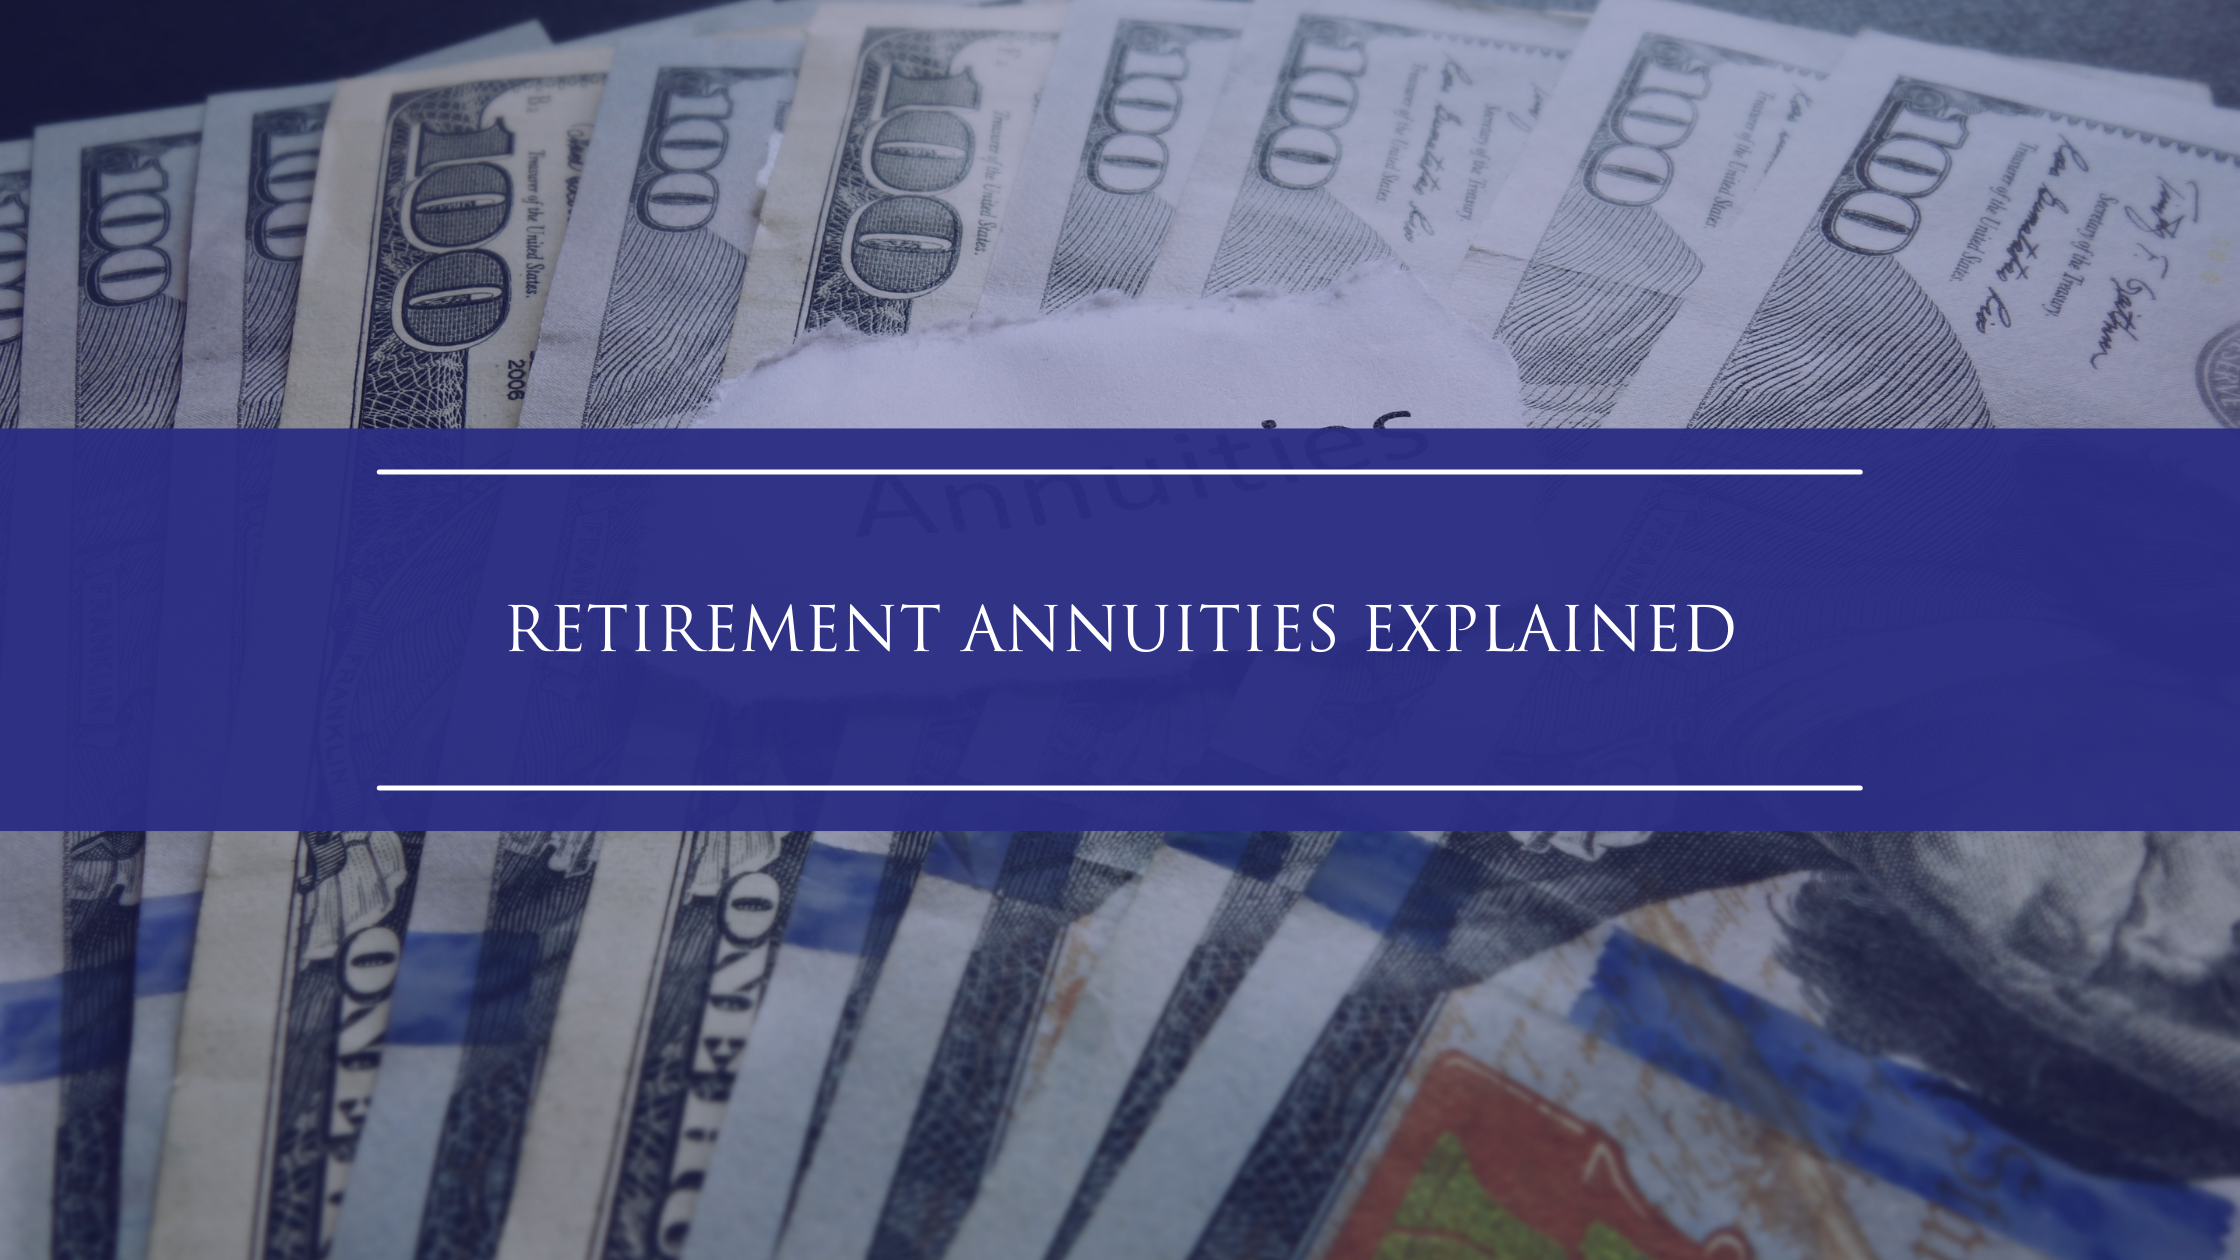 Retirement Annuities Explained: What They Are and How They Work